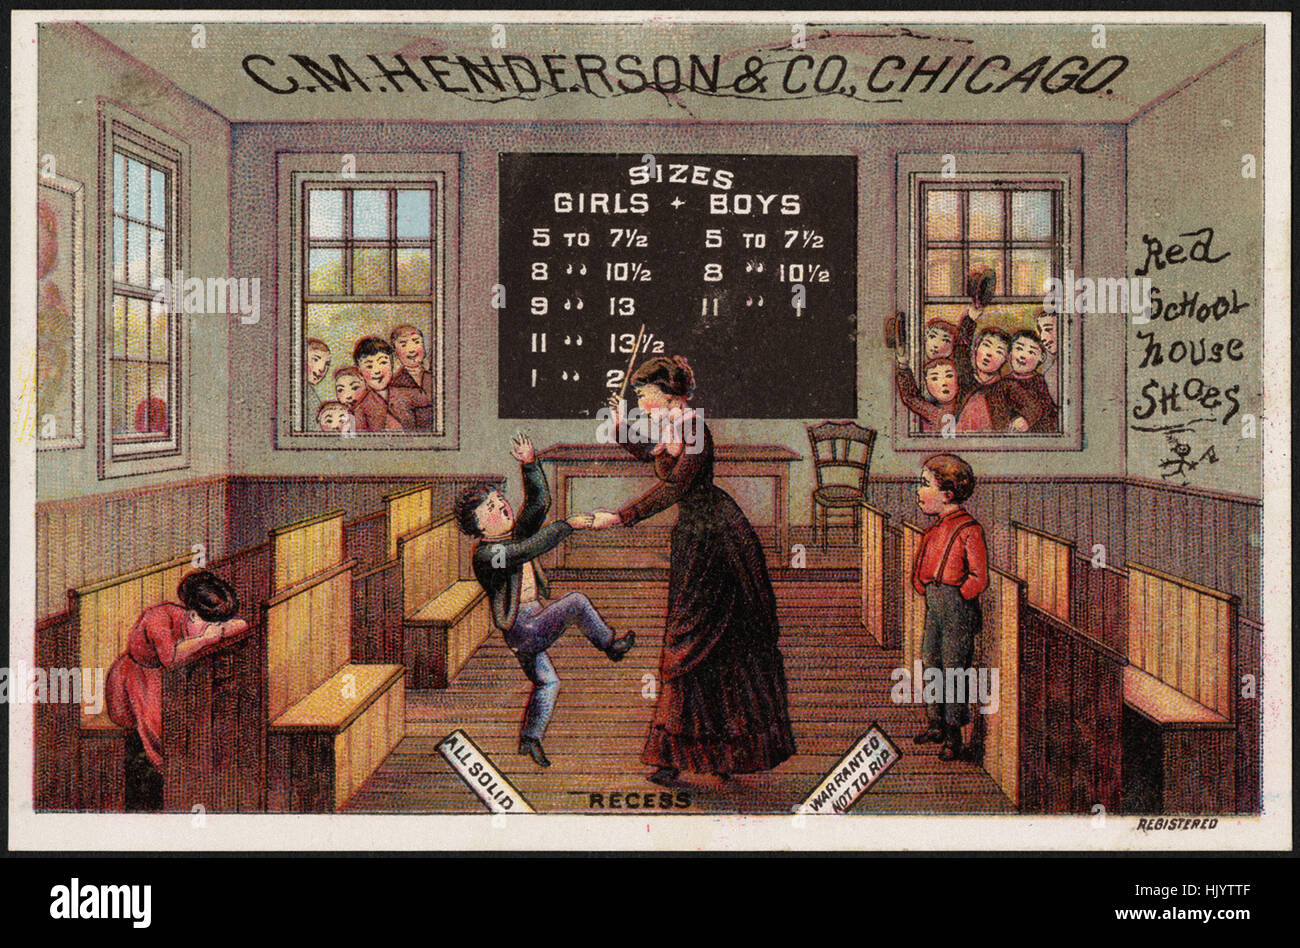 C. M. Henderson & Co., Chicago. Red School House shoes - recess Stock Photo  - Alamy